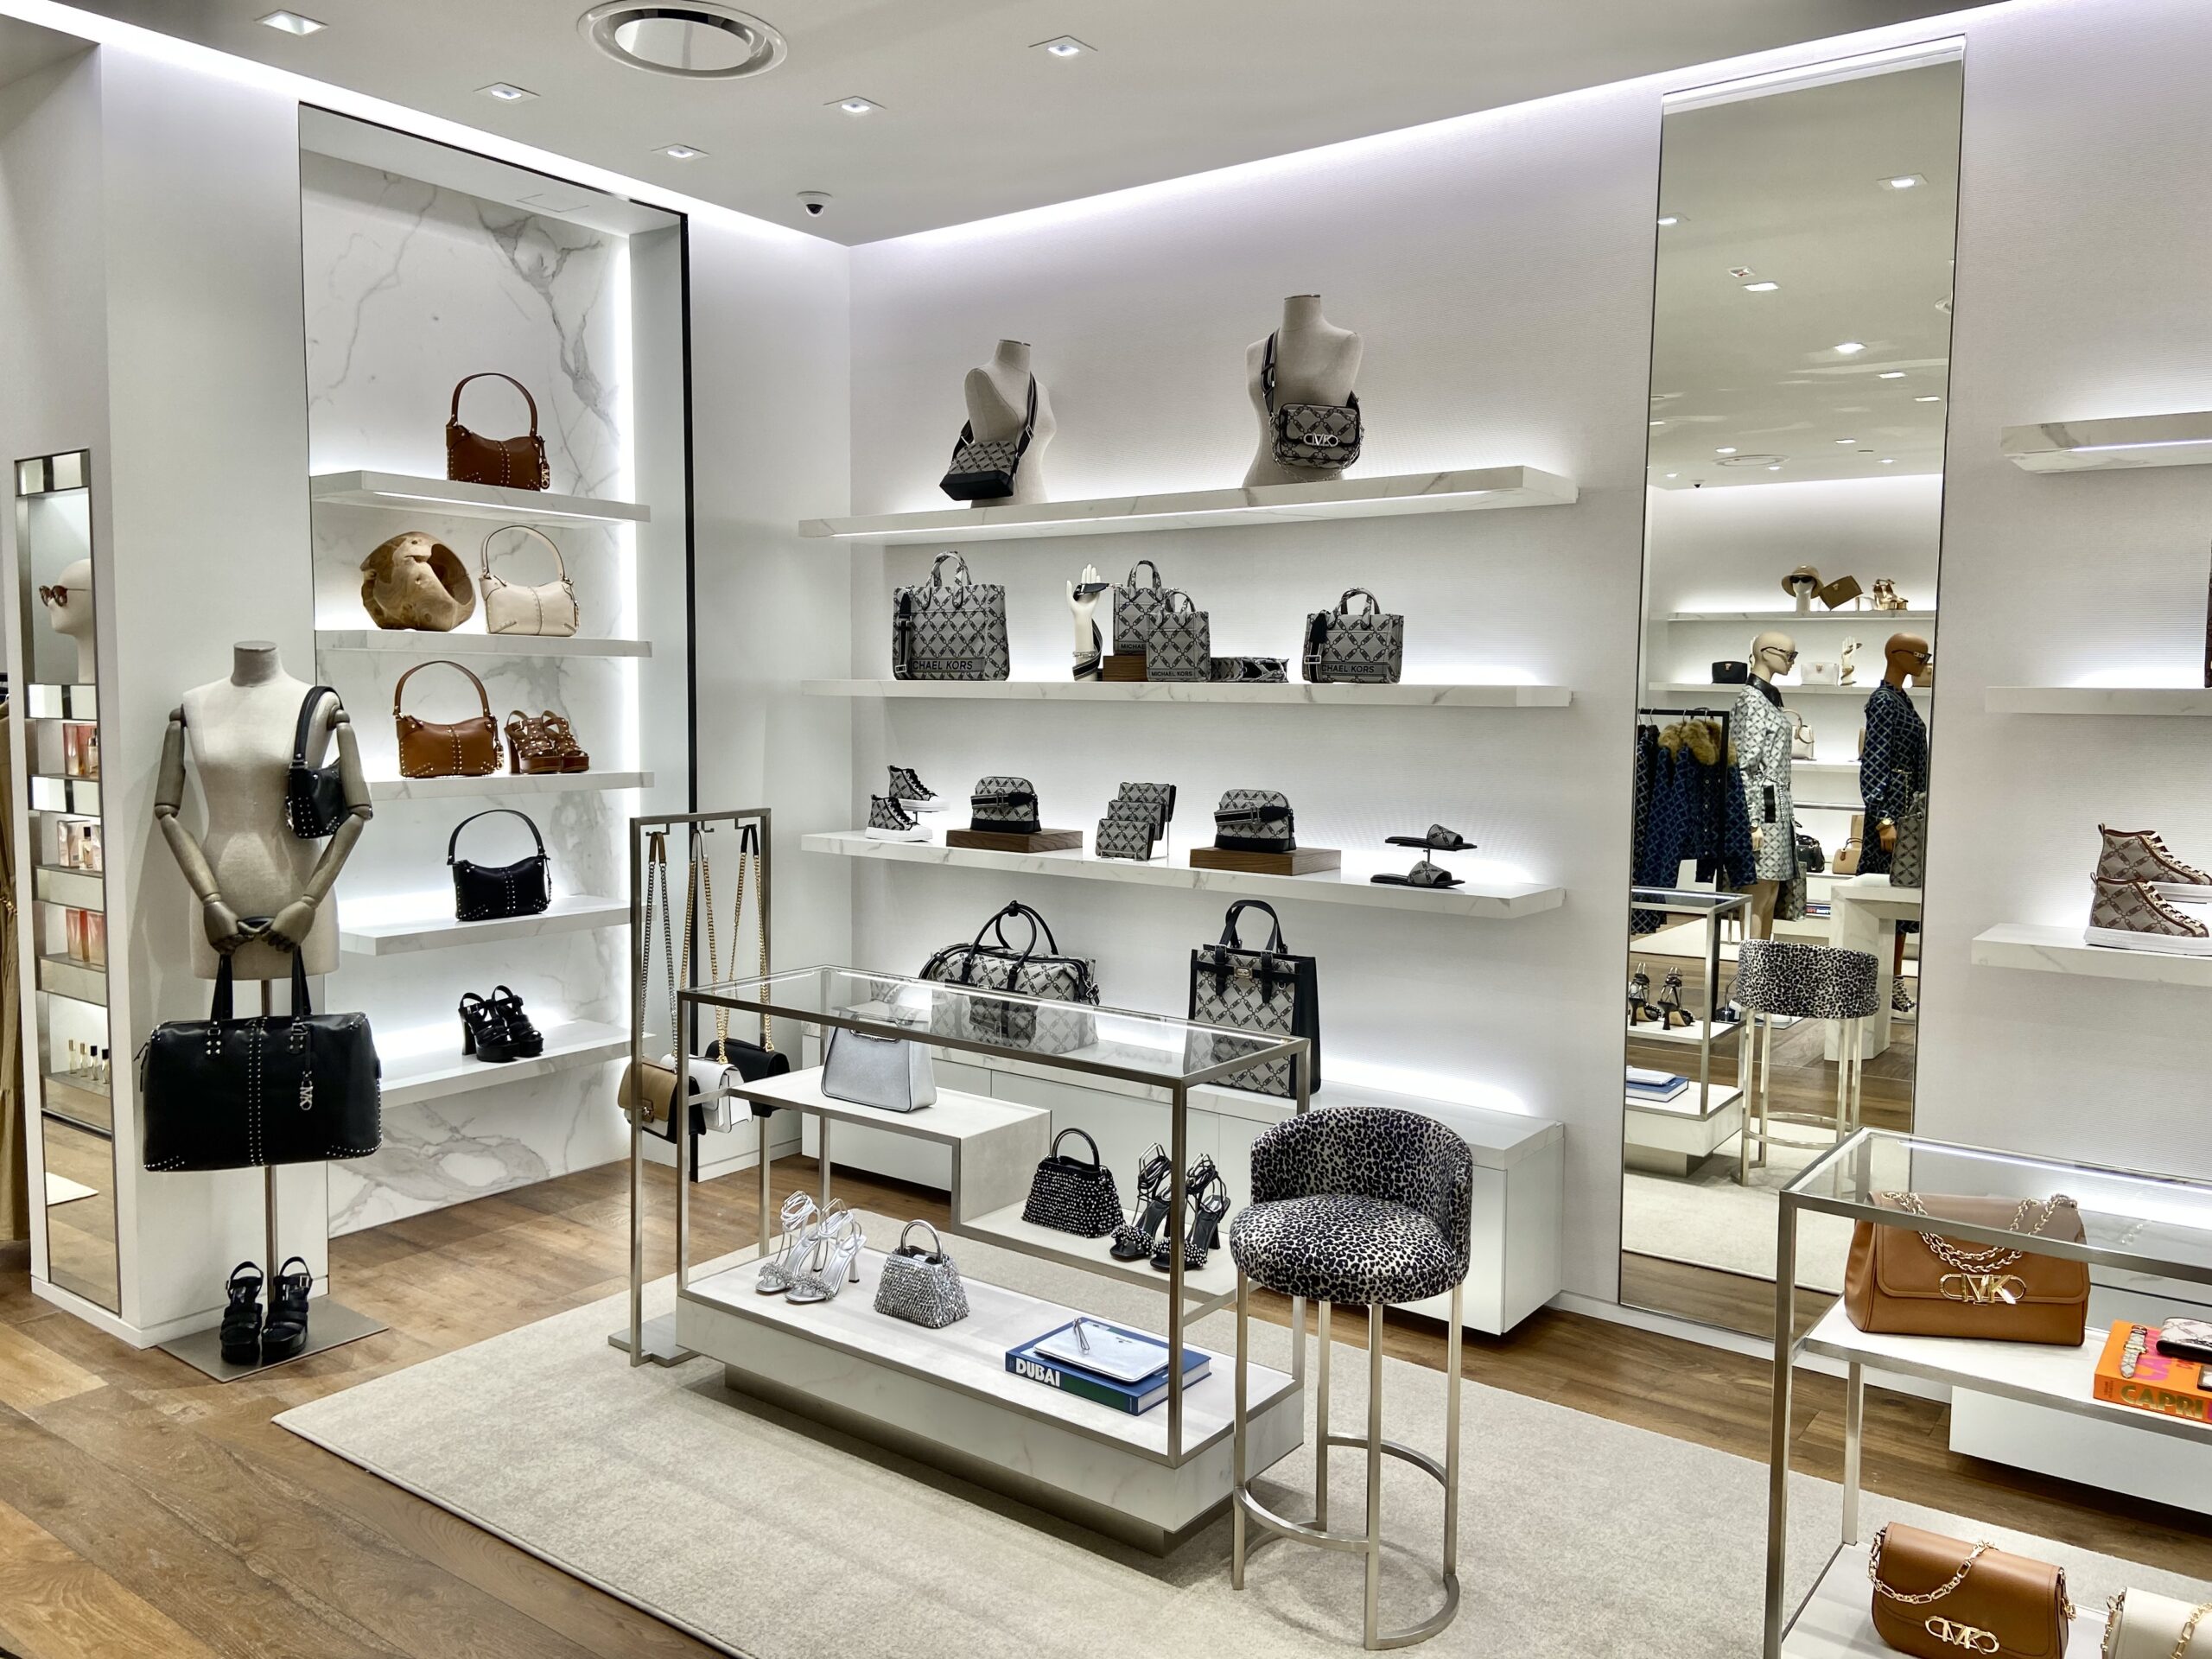 Michael Kors Unveils a Stunning New Store Concept in Vancouver